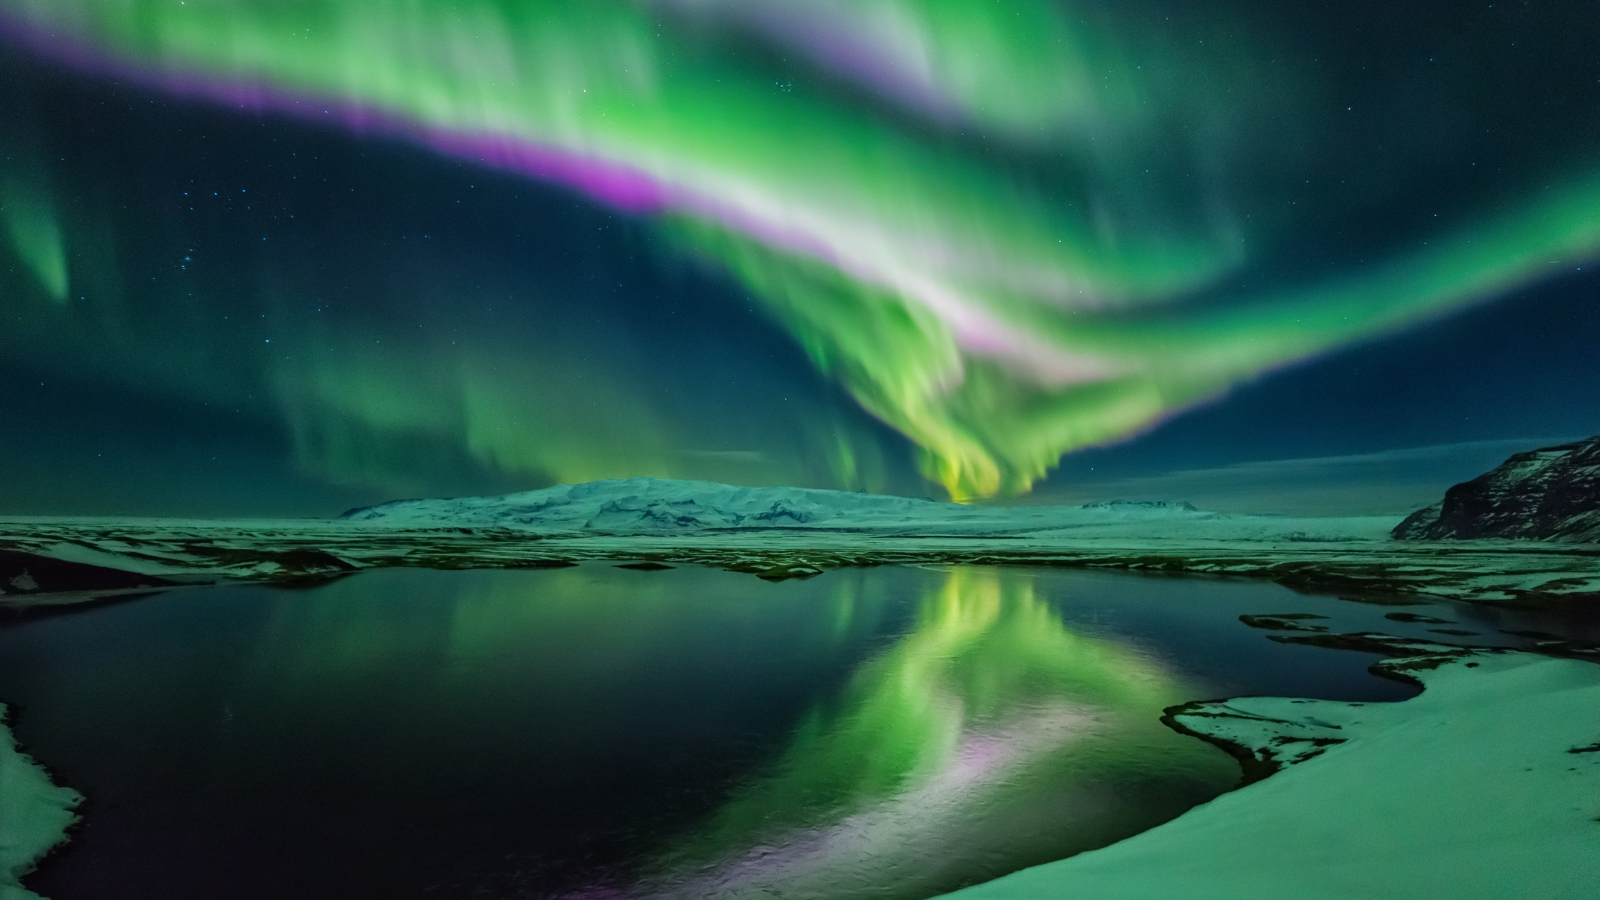 The Northern Lights as seen from Iceland.